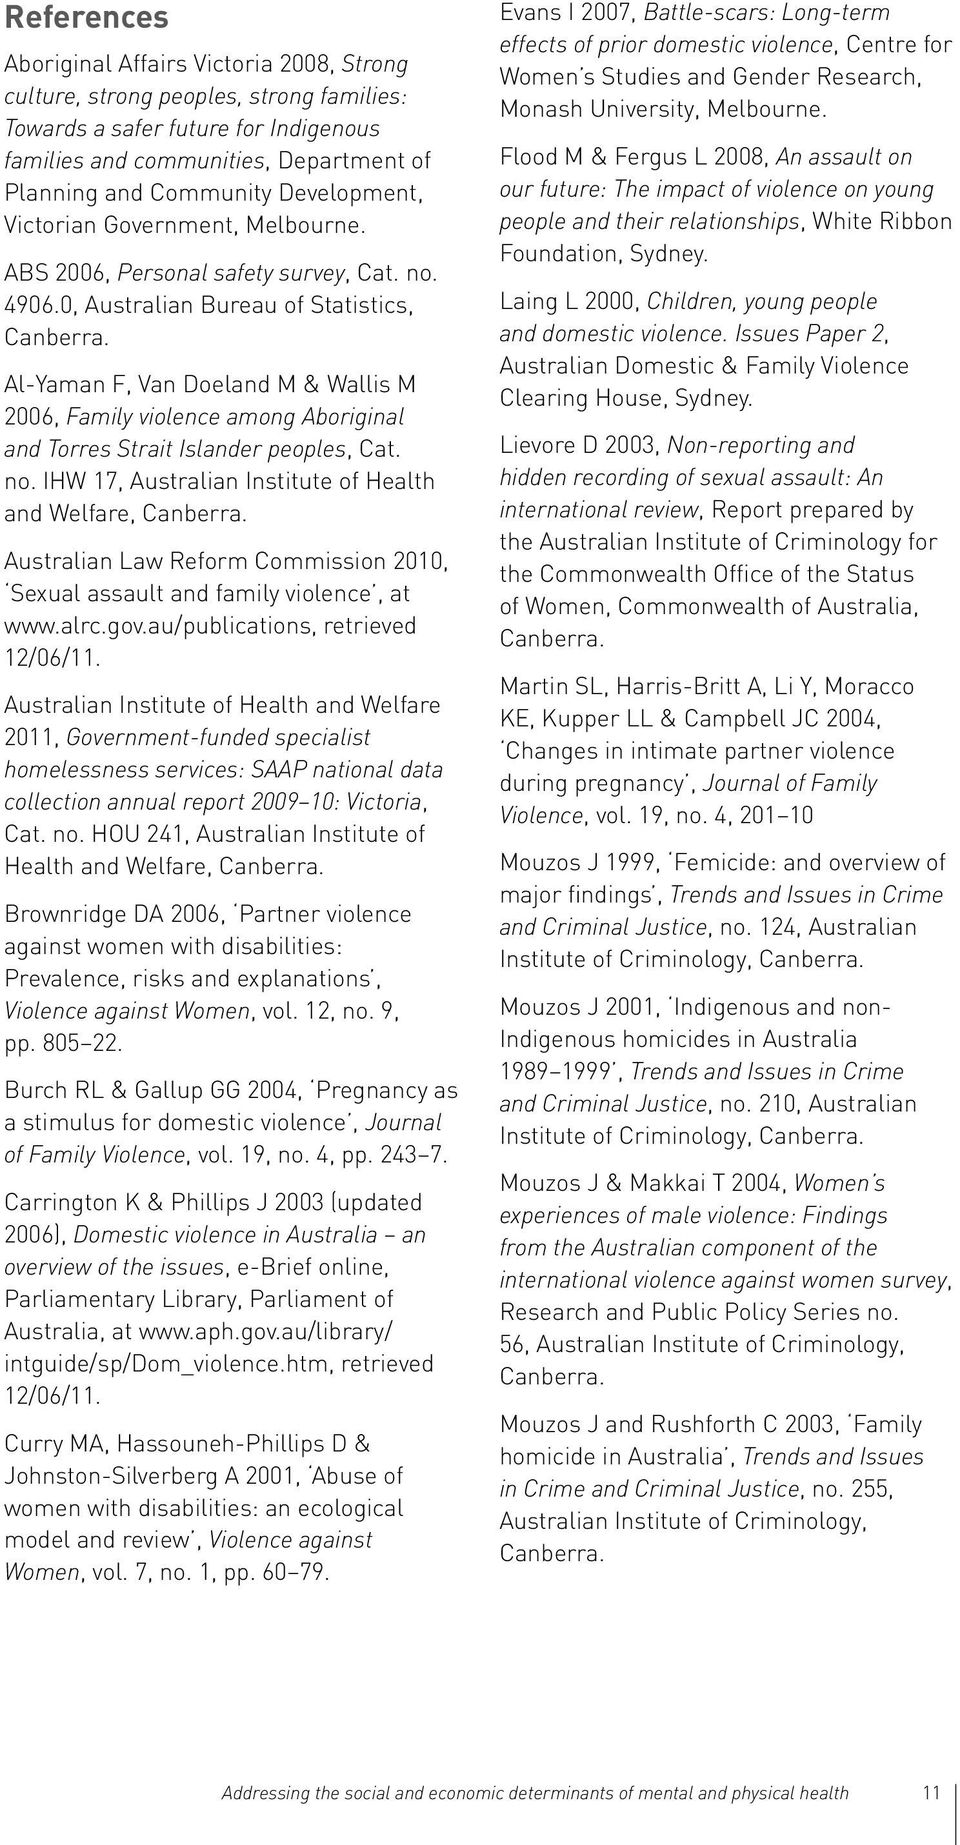 Al-Yaman F, Van Doeland M & Wallis M 2006, Family violence among Aboriginal and Torres Strait Islander peoples, Cat. no. IHW 17, Australian Institute of Health and Welfare, Canberra.